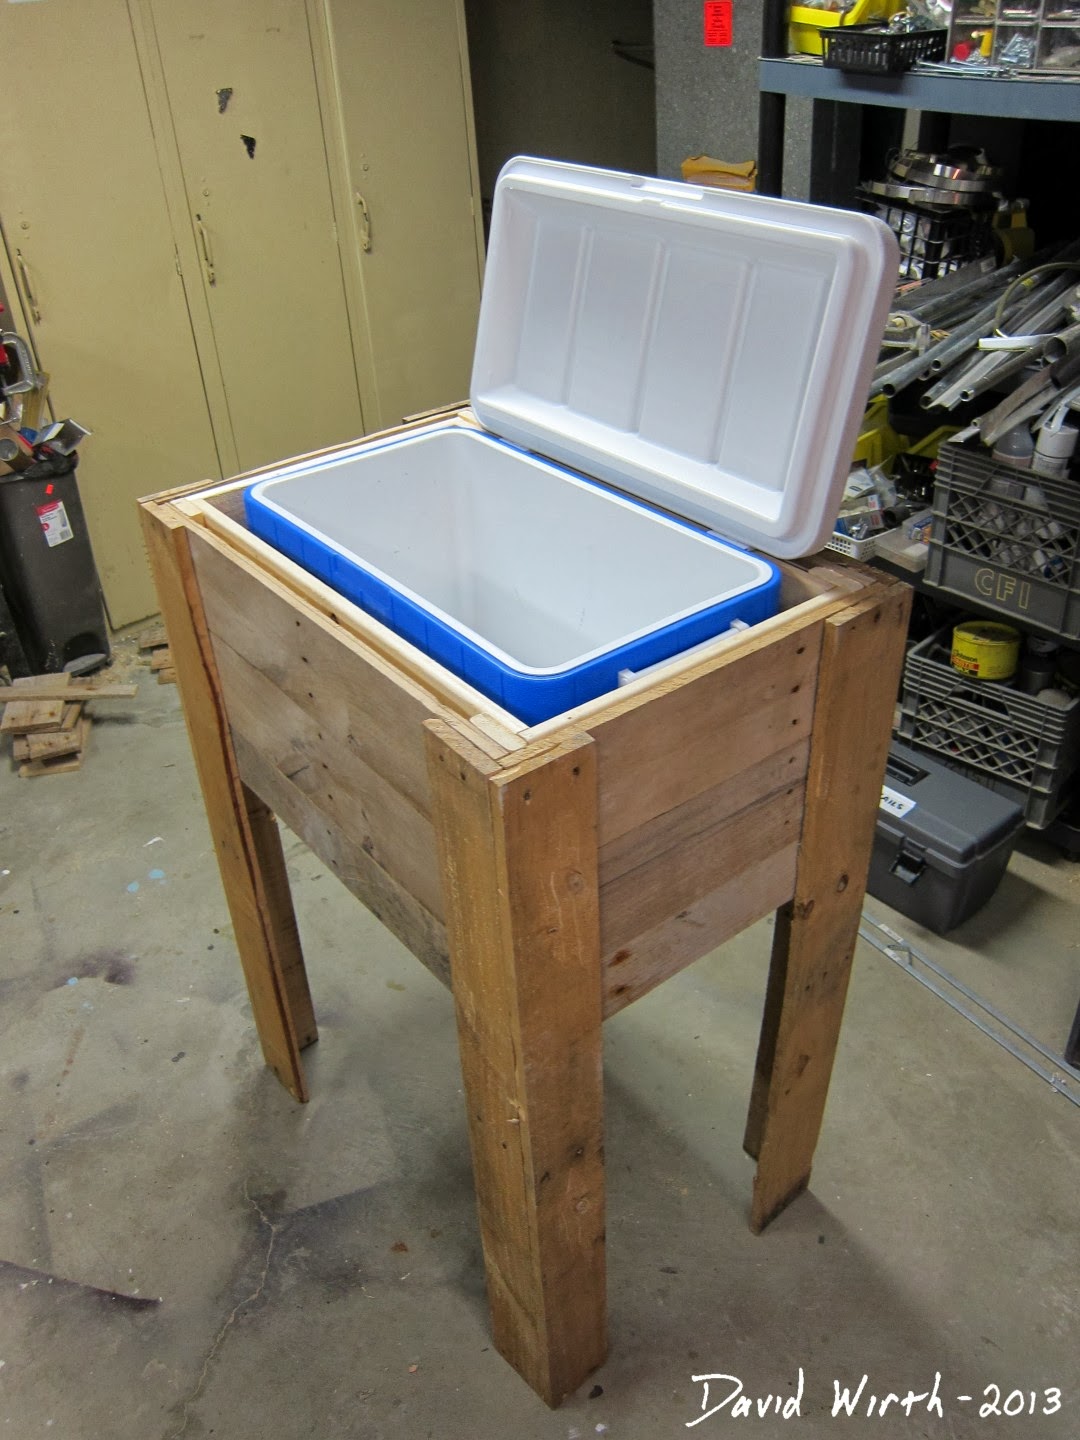 was done I started to make the lid which would cover the cooler 